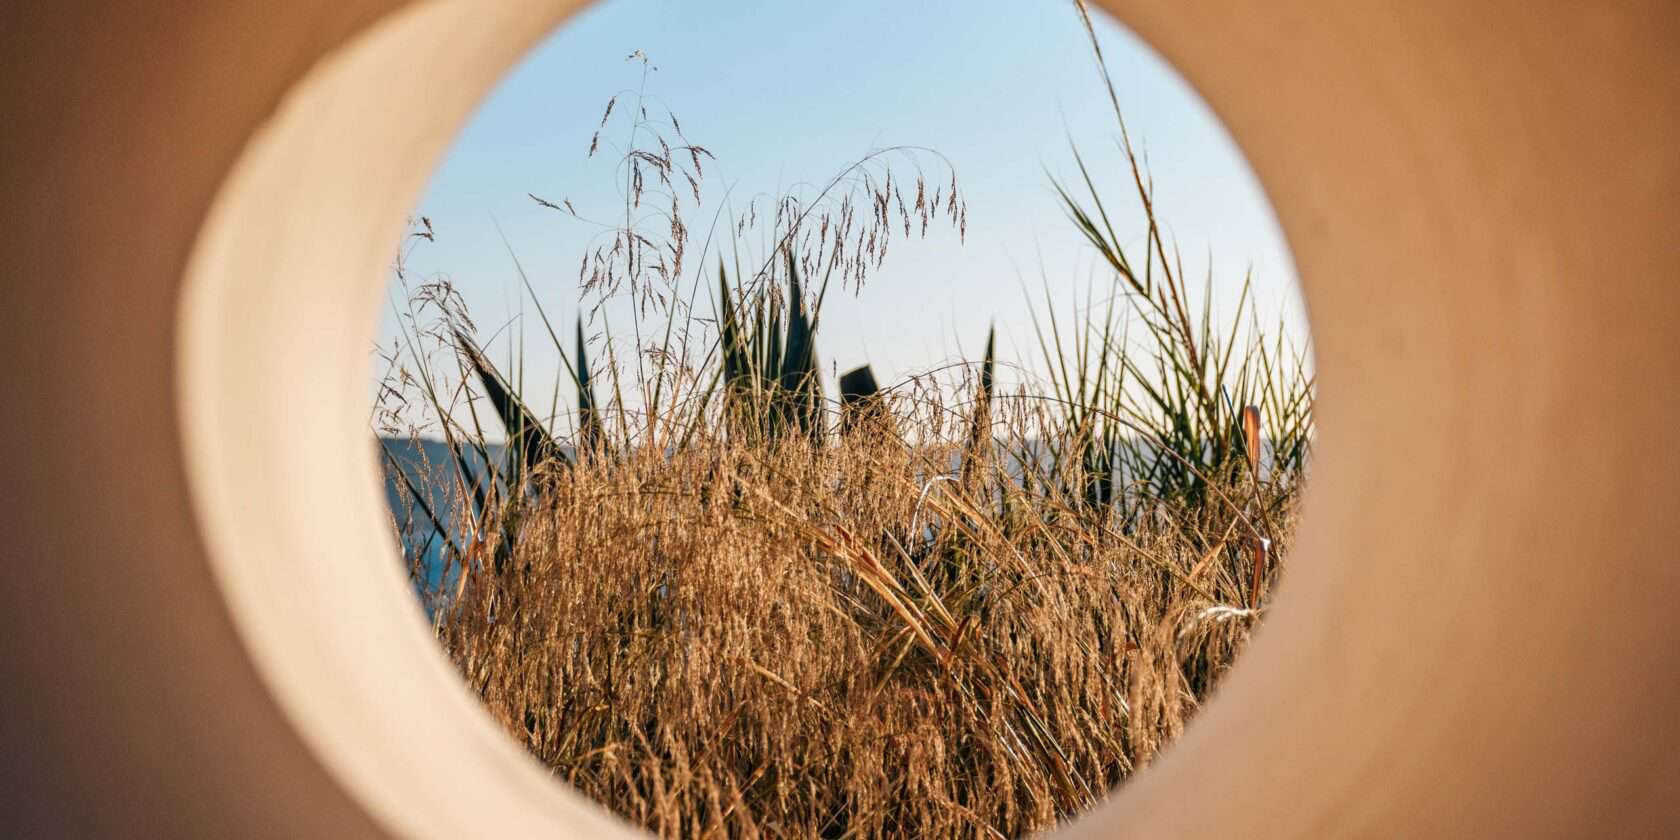 A circular window showing a view of wild grass.